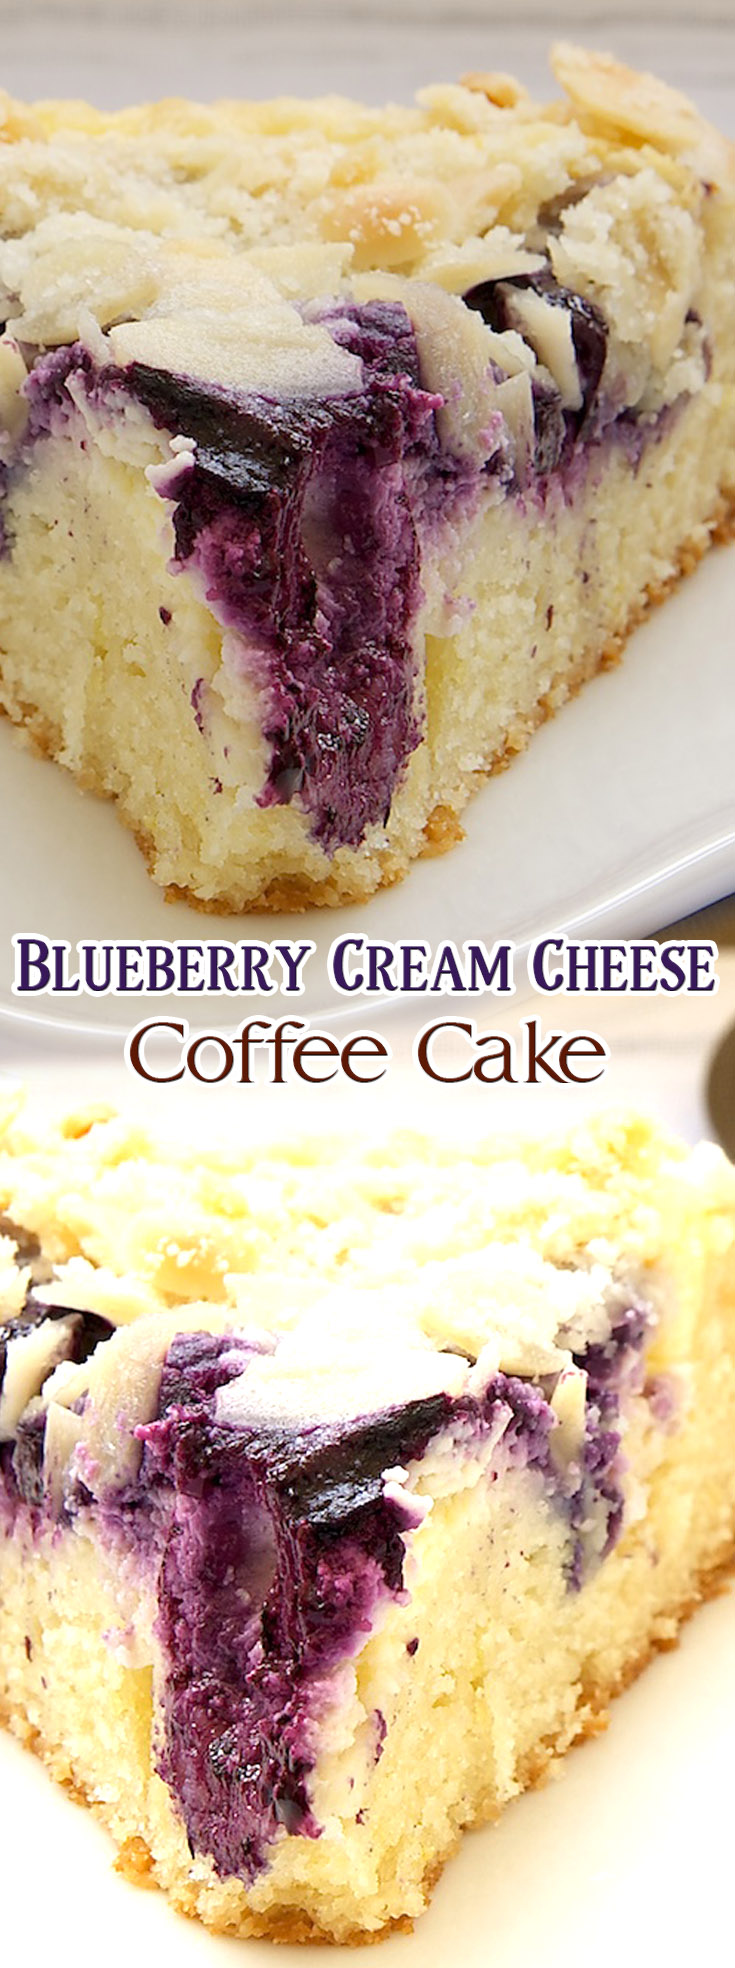 Blueberry Lemon Breakfast Cake • The View from Great Island